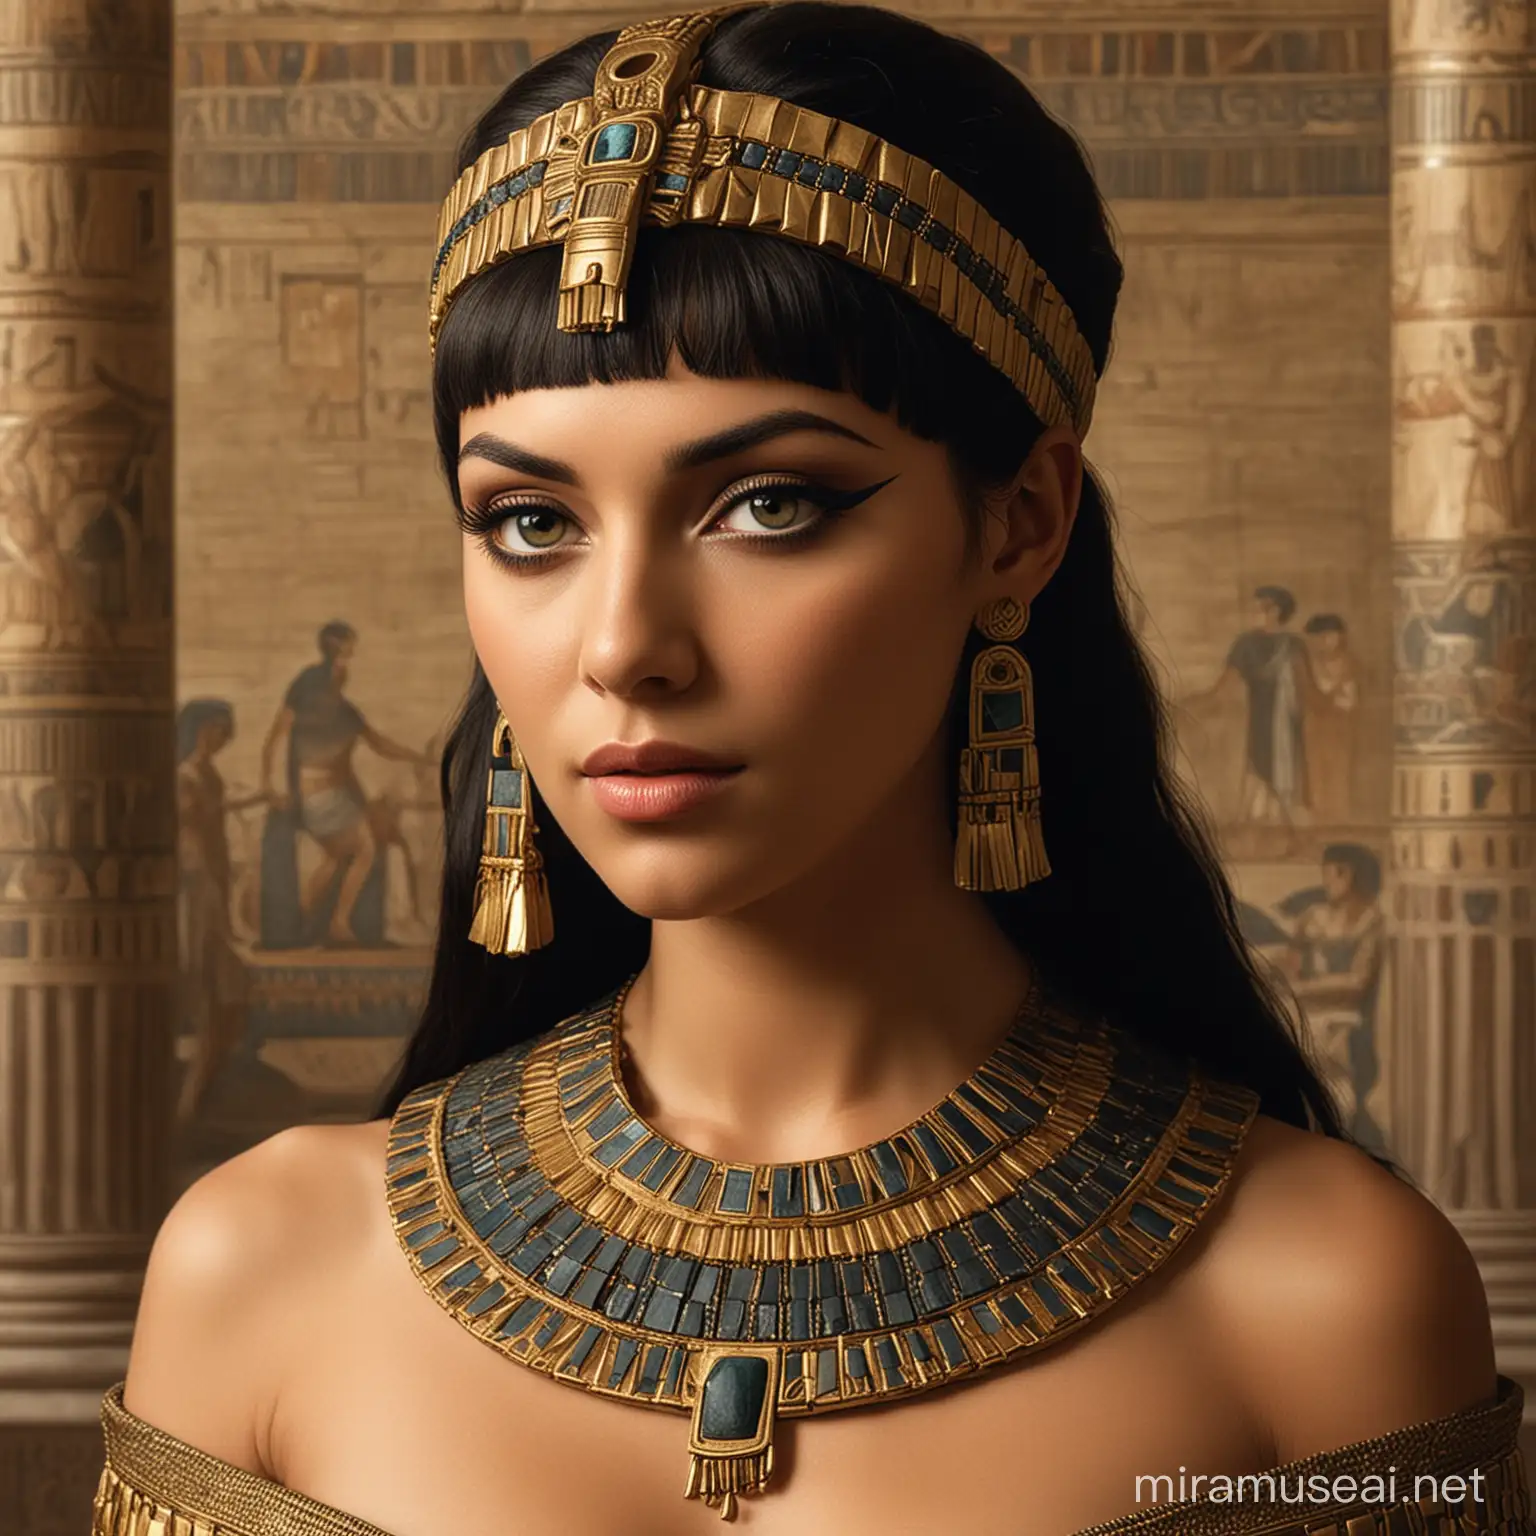 Cleopatra A Powerful Queens Political Intrigue and Romance with Marcus Antonius